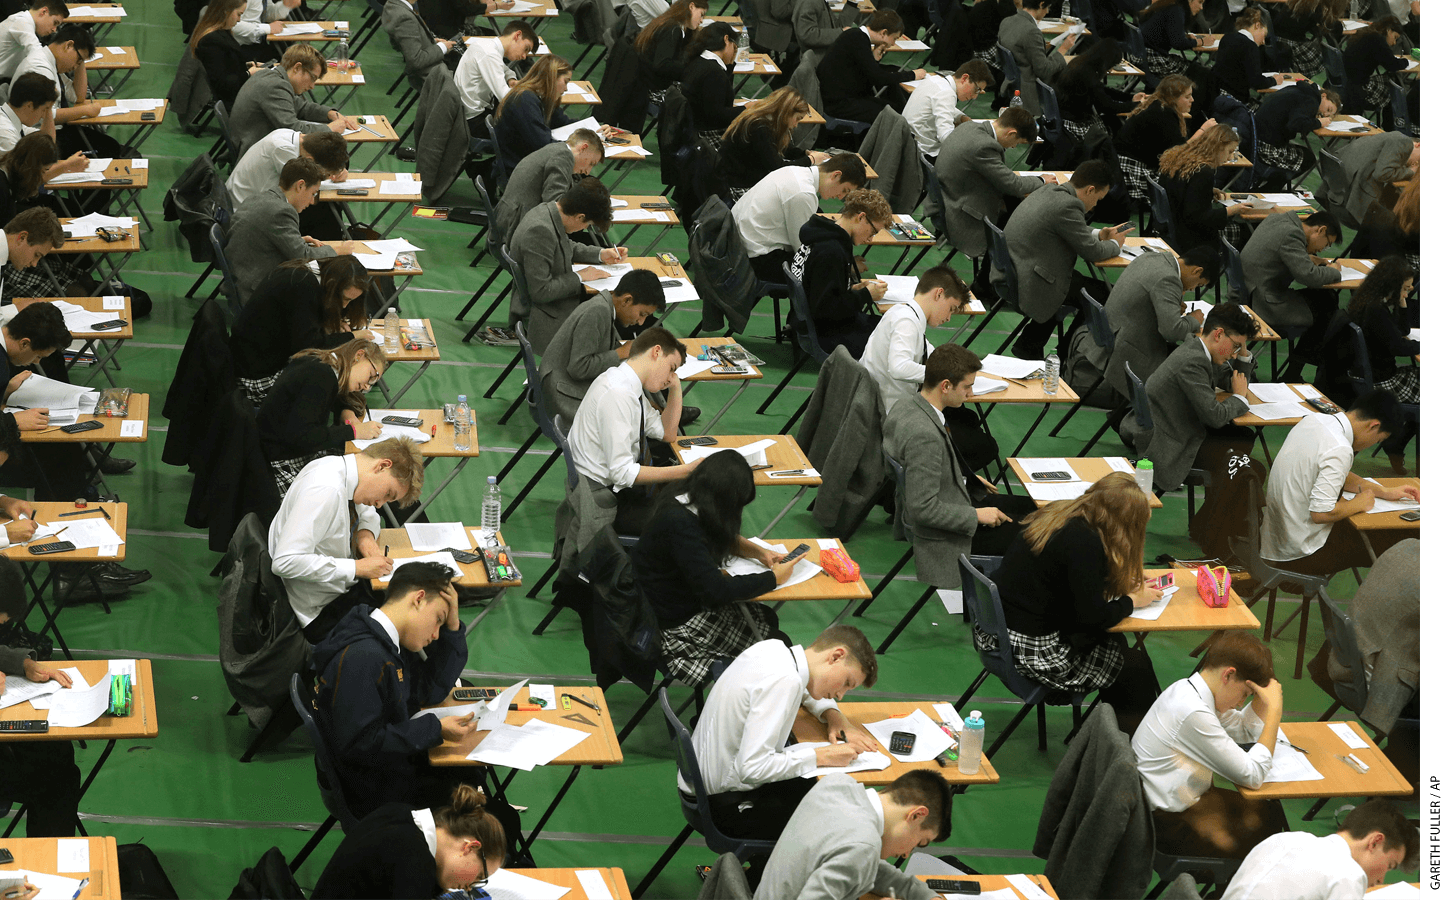 Students in London sit for their PISA exams in 2017. Although the United Kingdom was among the top-scoring countries, Asian nations like China and Singapore performed better.